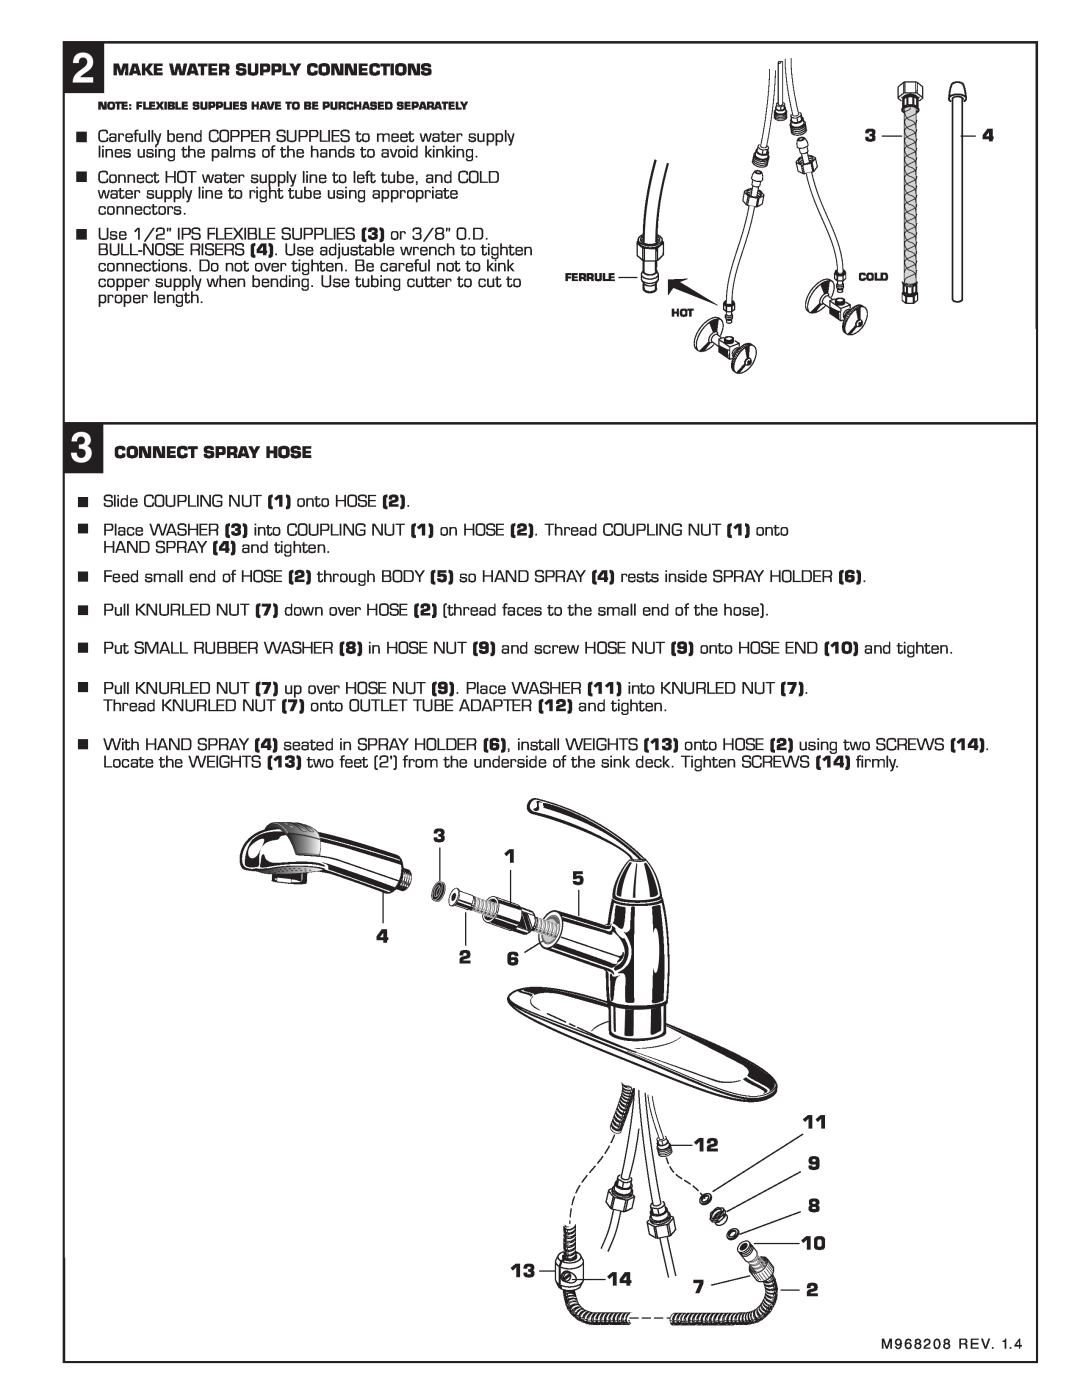 American Standard 4137.1 installation instructions Make Water Supply Connections, Connect Spray Hose, 4 2 